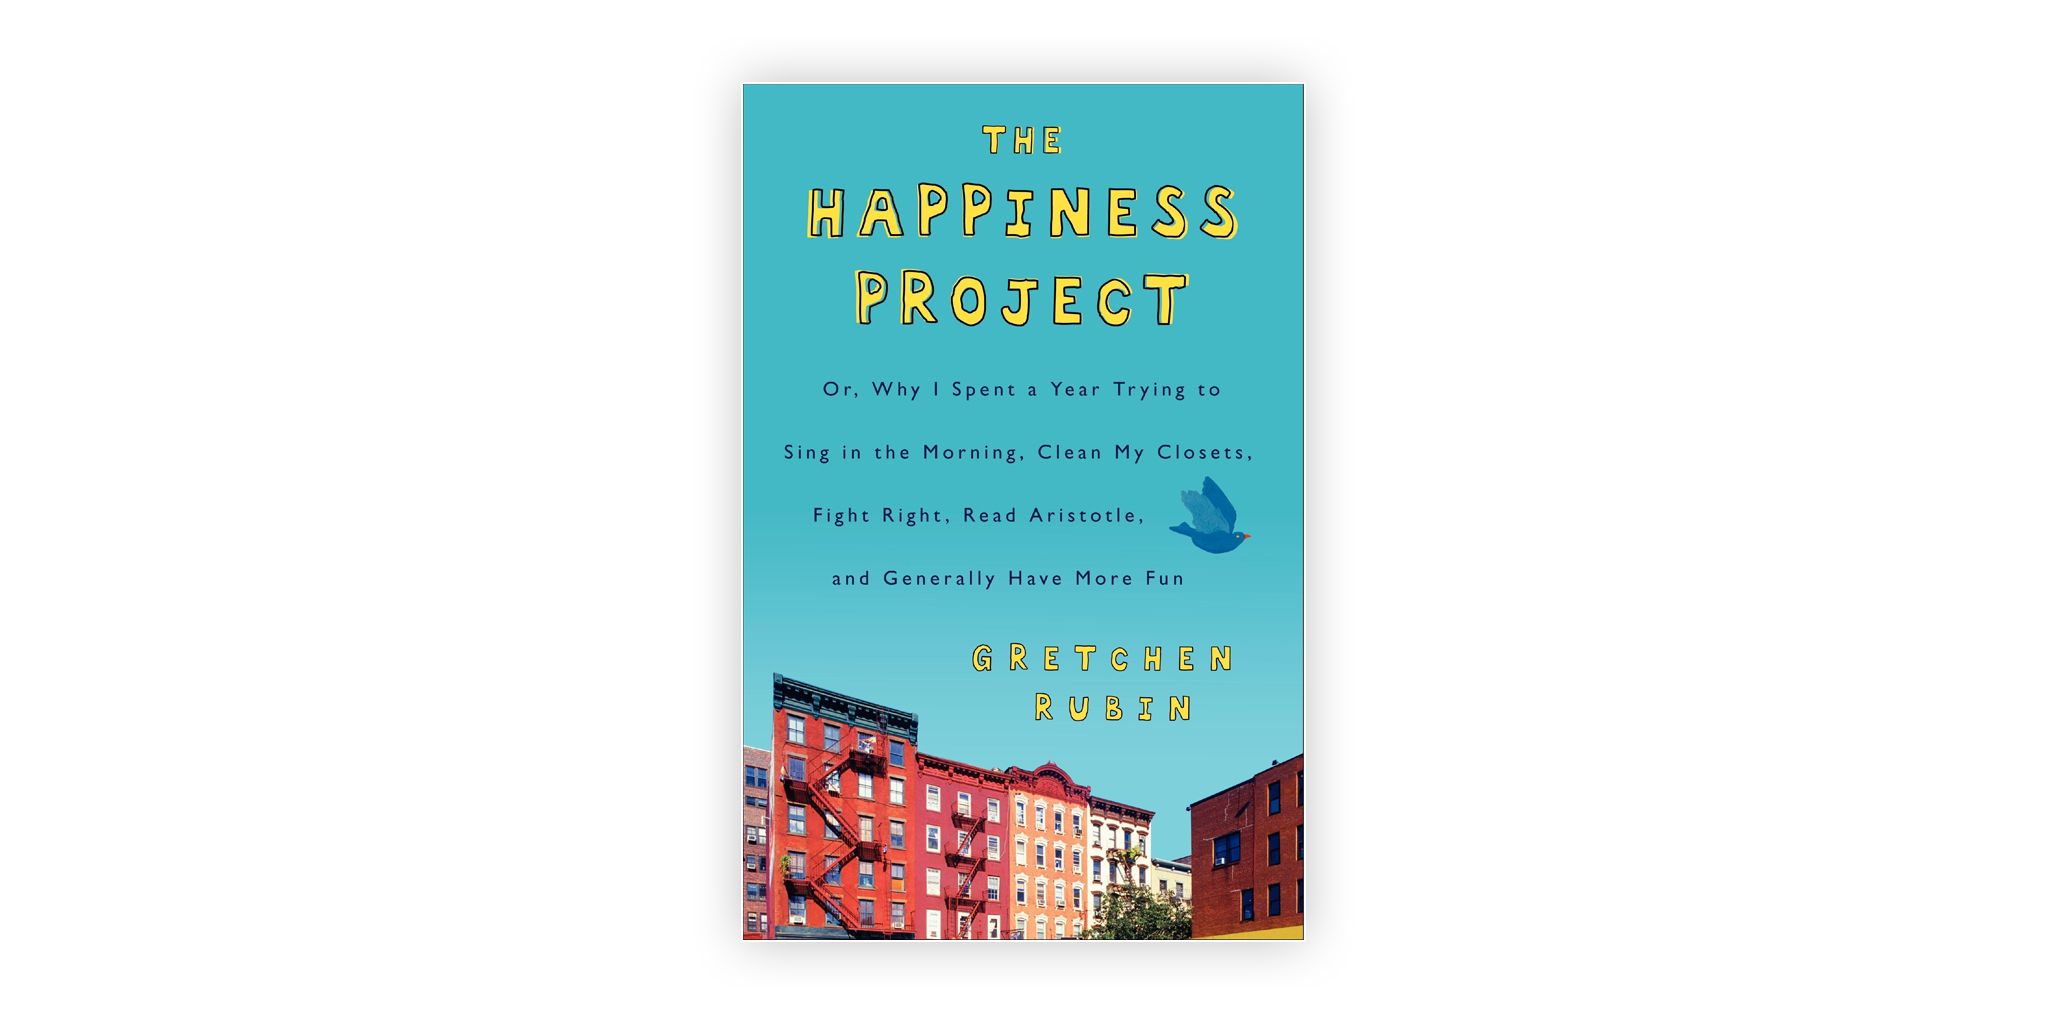 The Happiness Project book